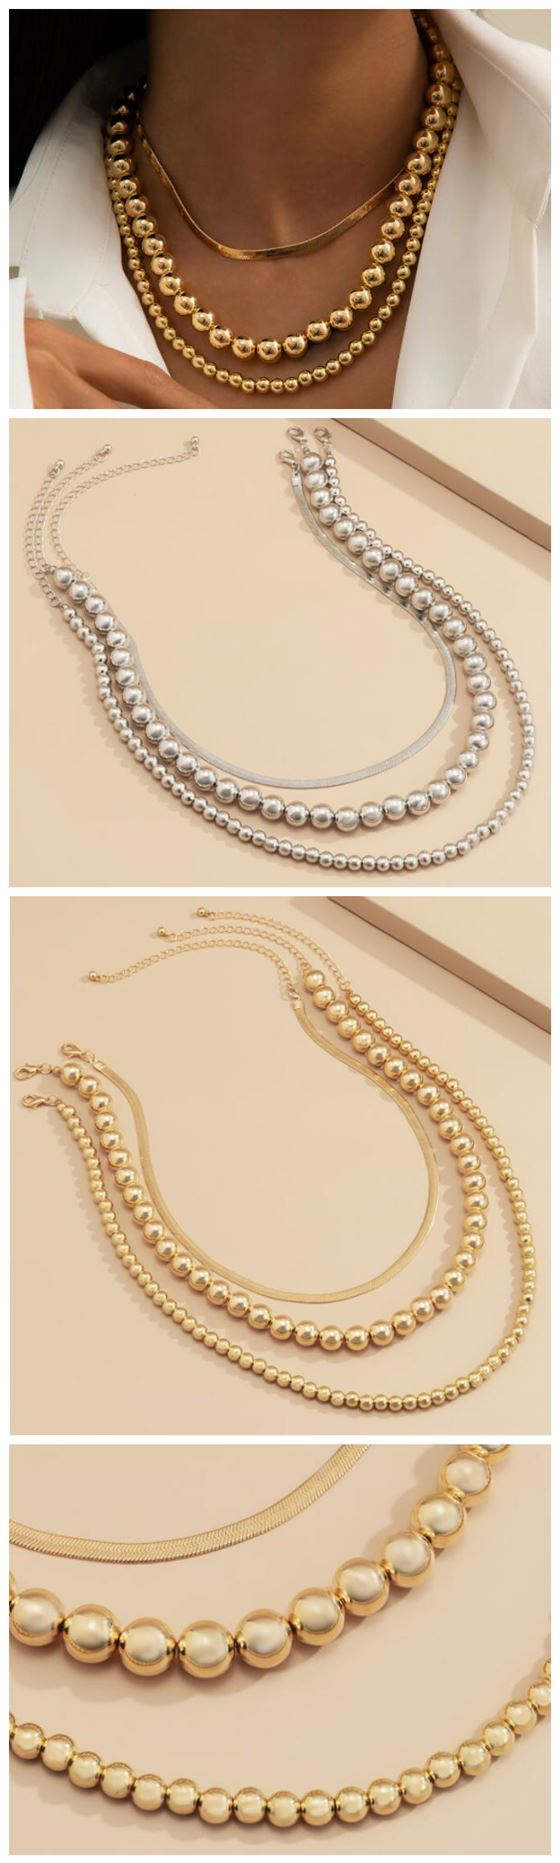 Hip-Hop Style Wholesale Jewelry Beads Chain Multi-layer Women Necklace ...